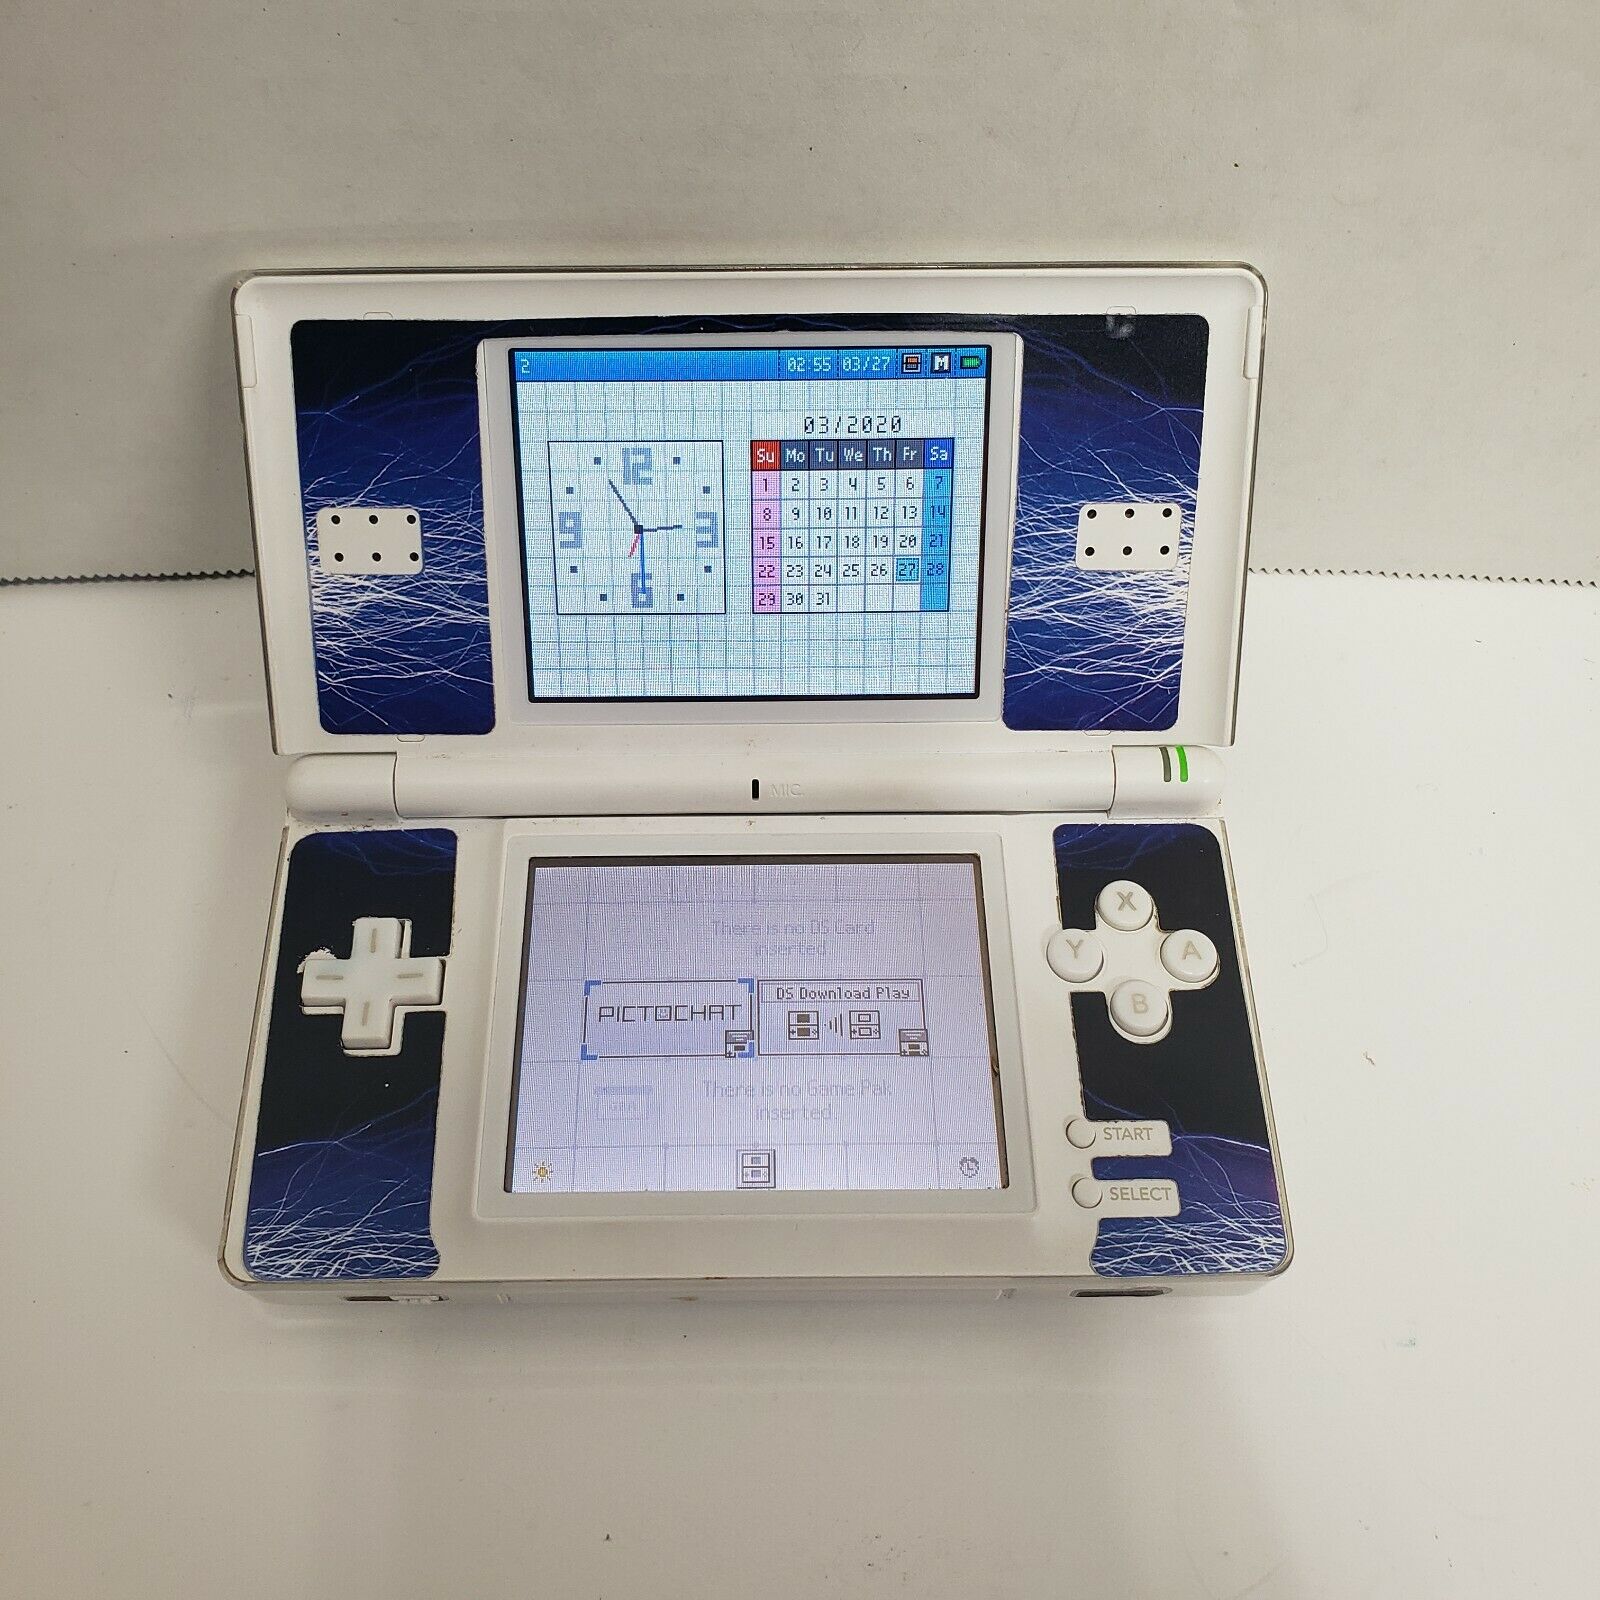 Nintendo Ds Lite White System Handheld Console Tested Icommerce On Web